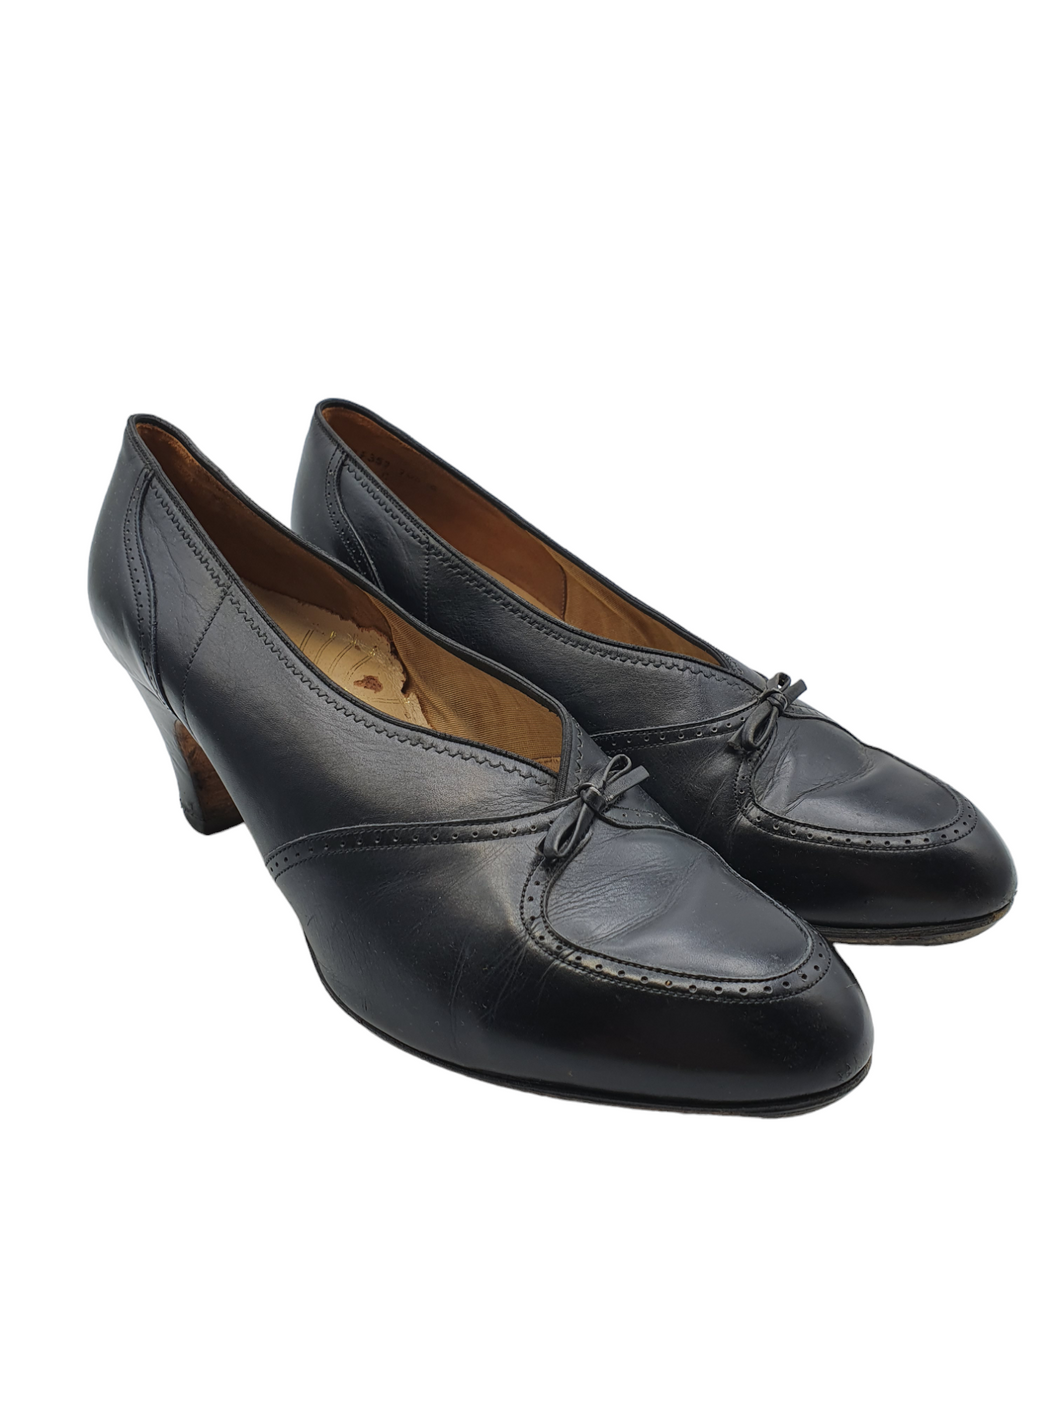 Late 1940s Black Leather Shoes With Bows